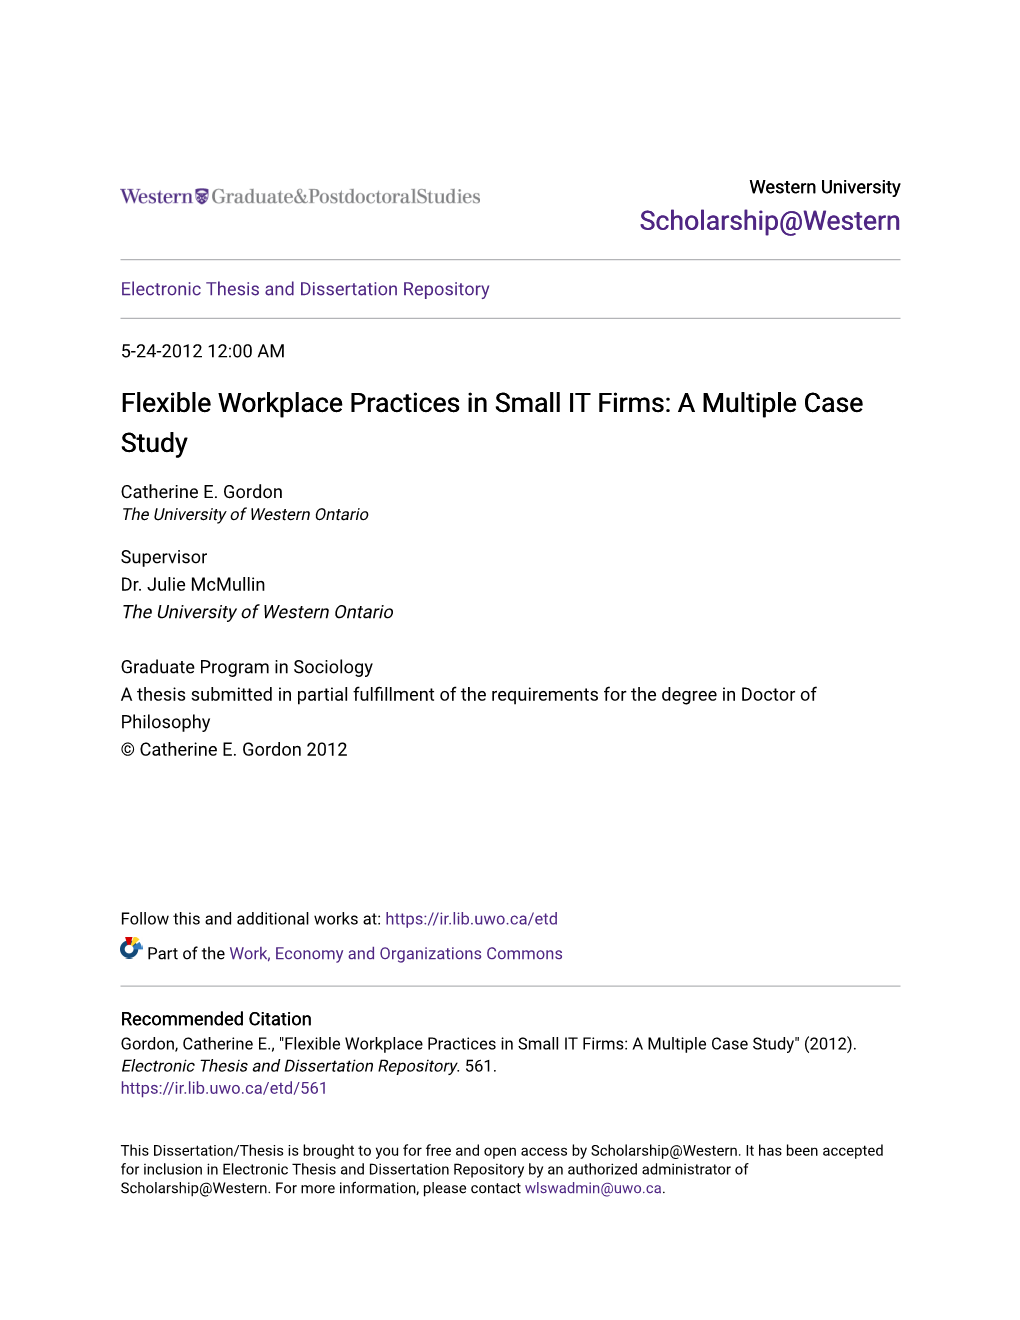 Flexible Workplace Practices in Small IT Firms: a Multiple Case Study